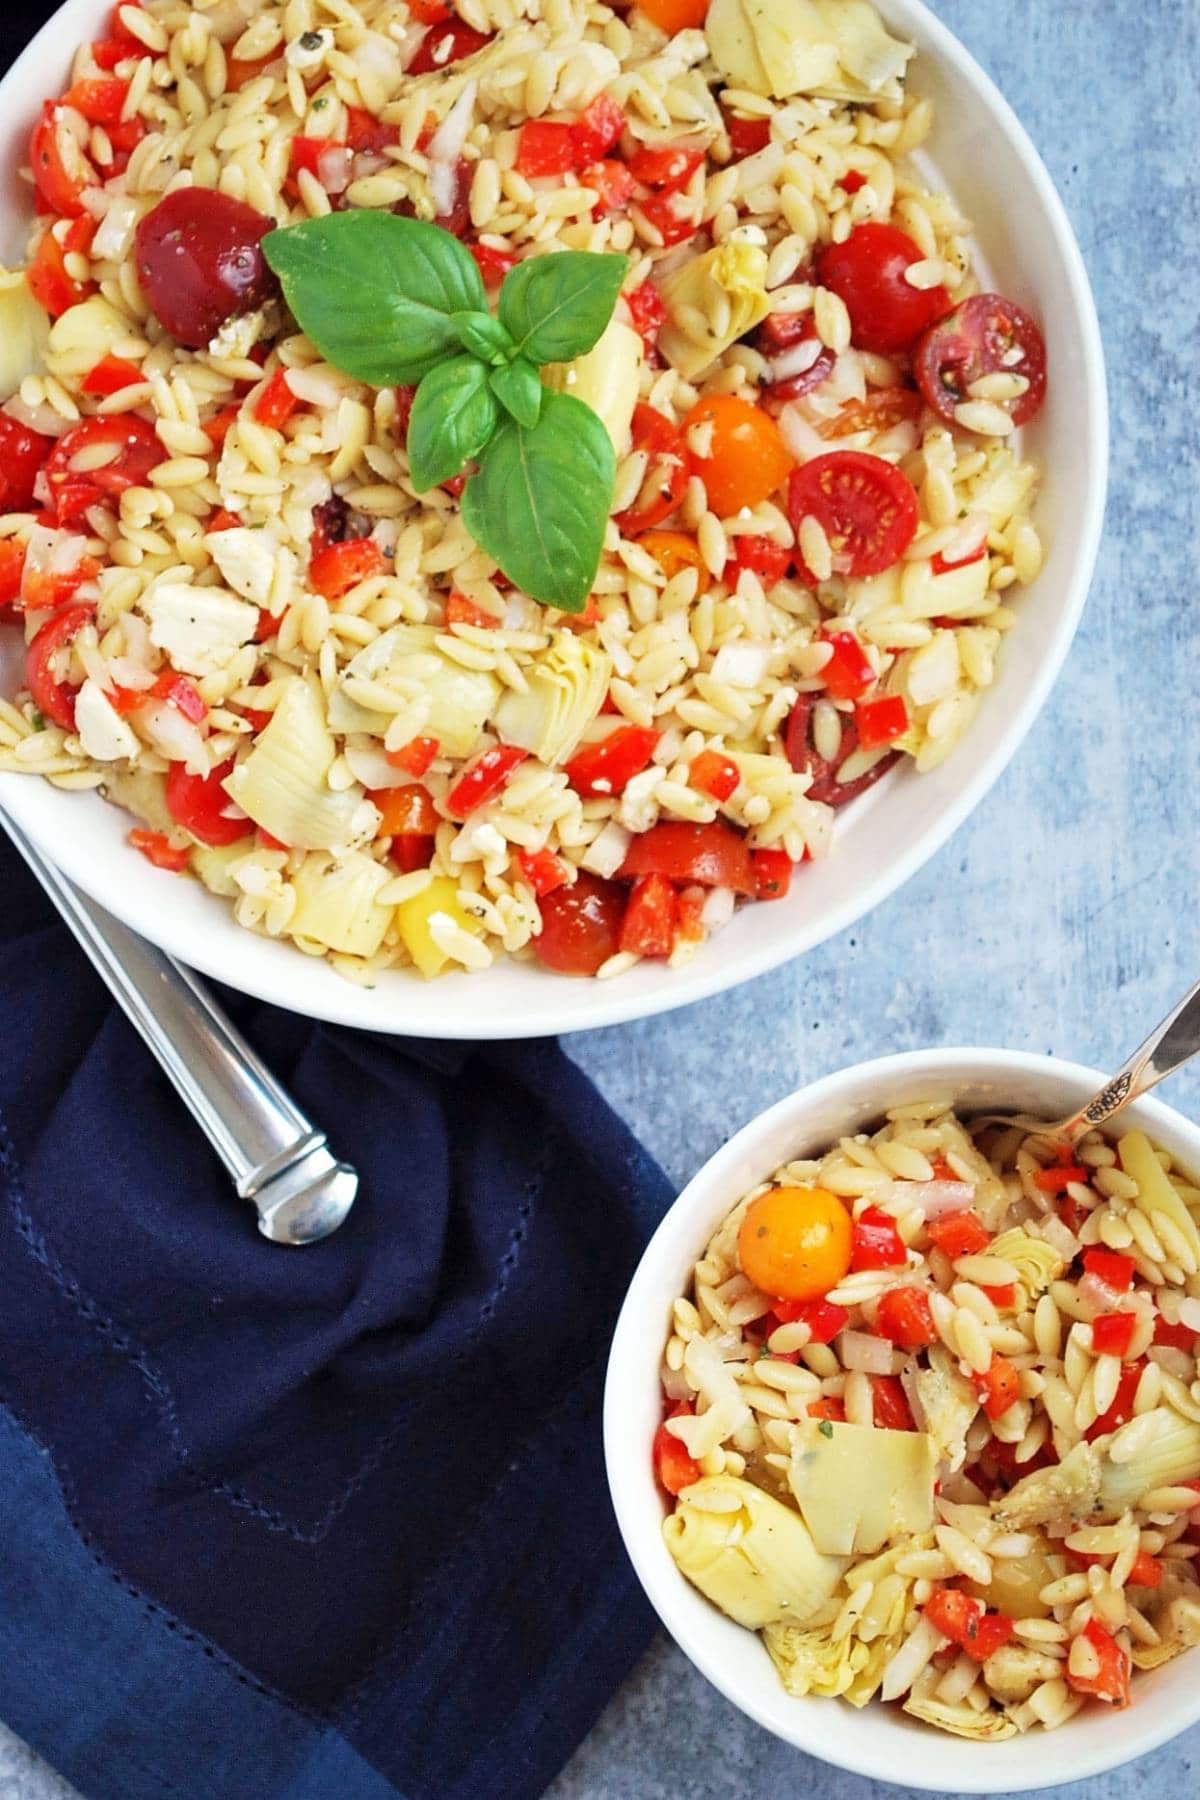 A large serving bowl of lemon orzo pasta salad with a small bowl of pasta salad next to it